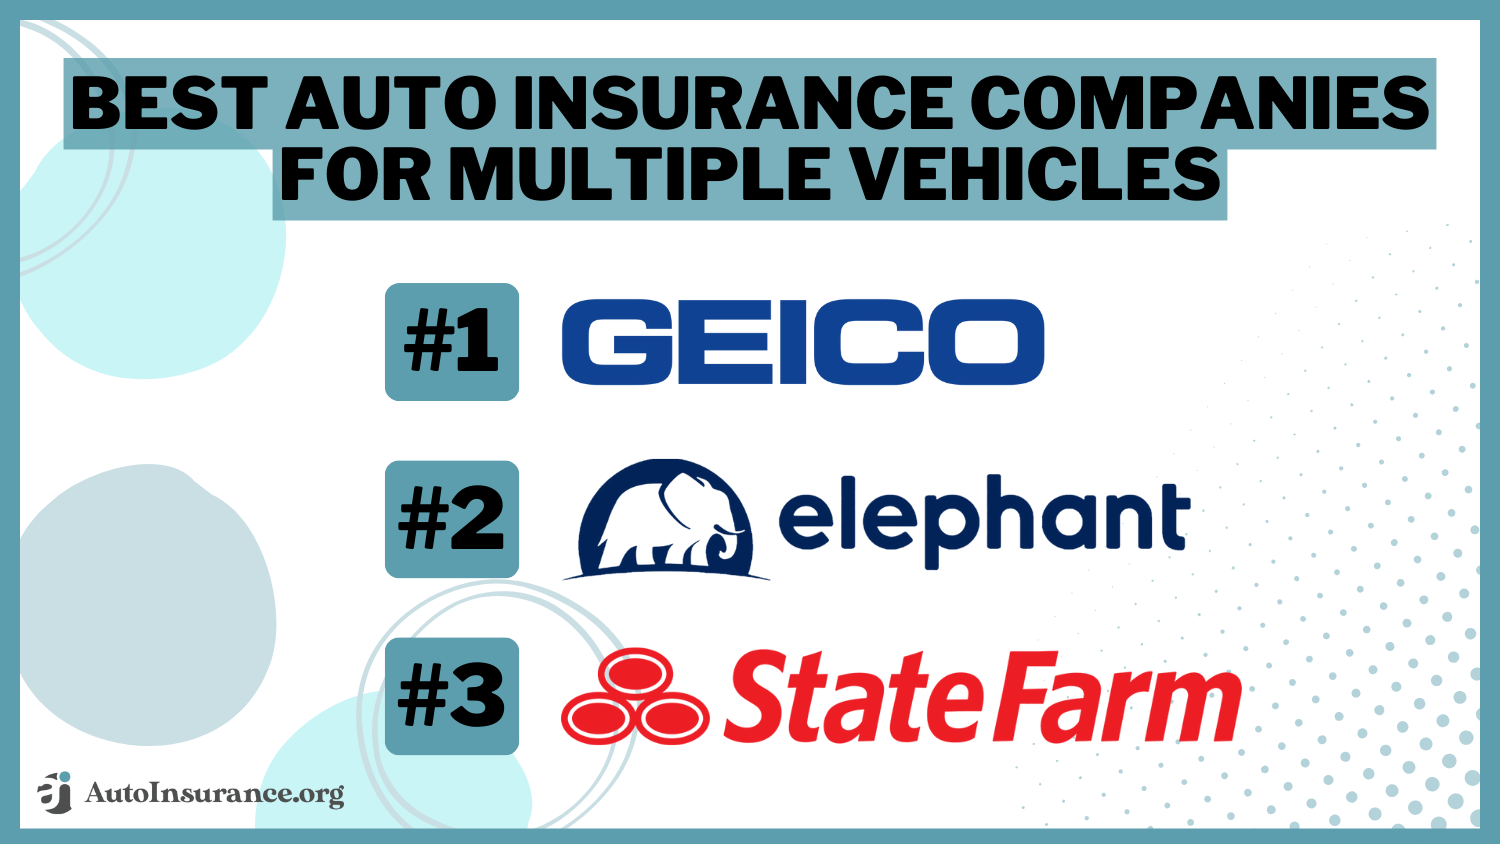 Geico elephant state farm Best Auto Insurance Companies for Multiple Vehicles